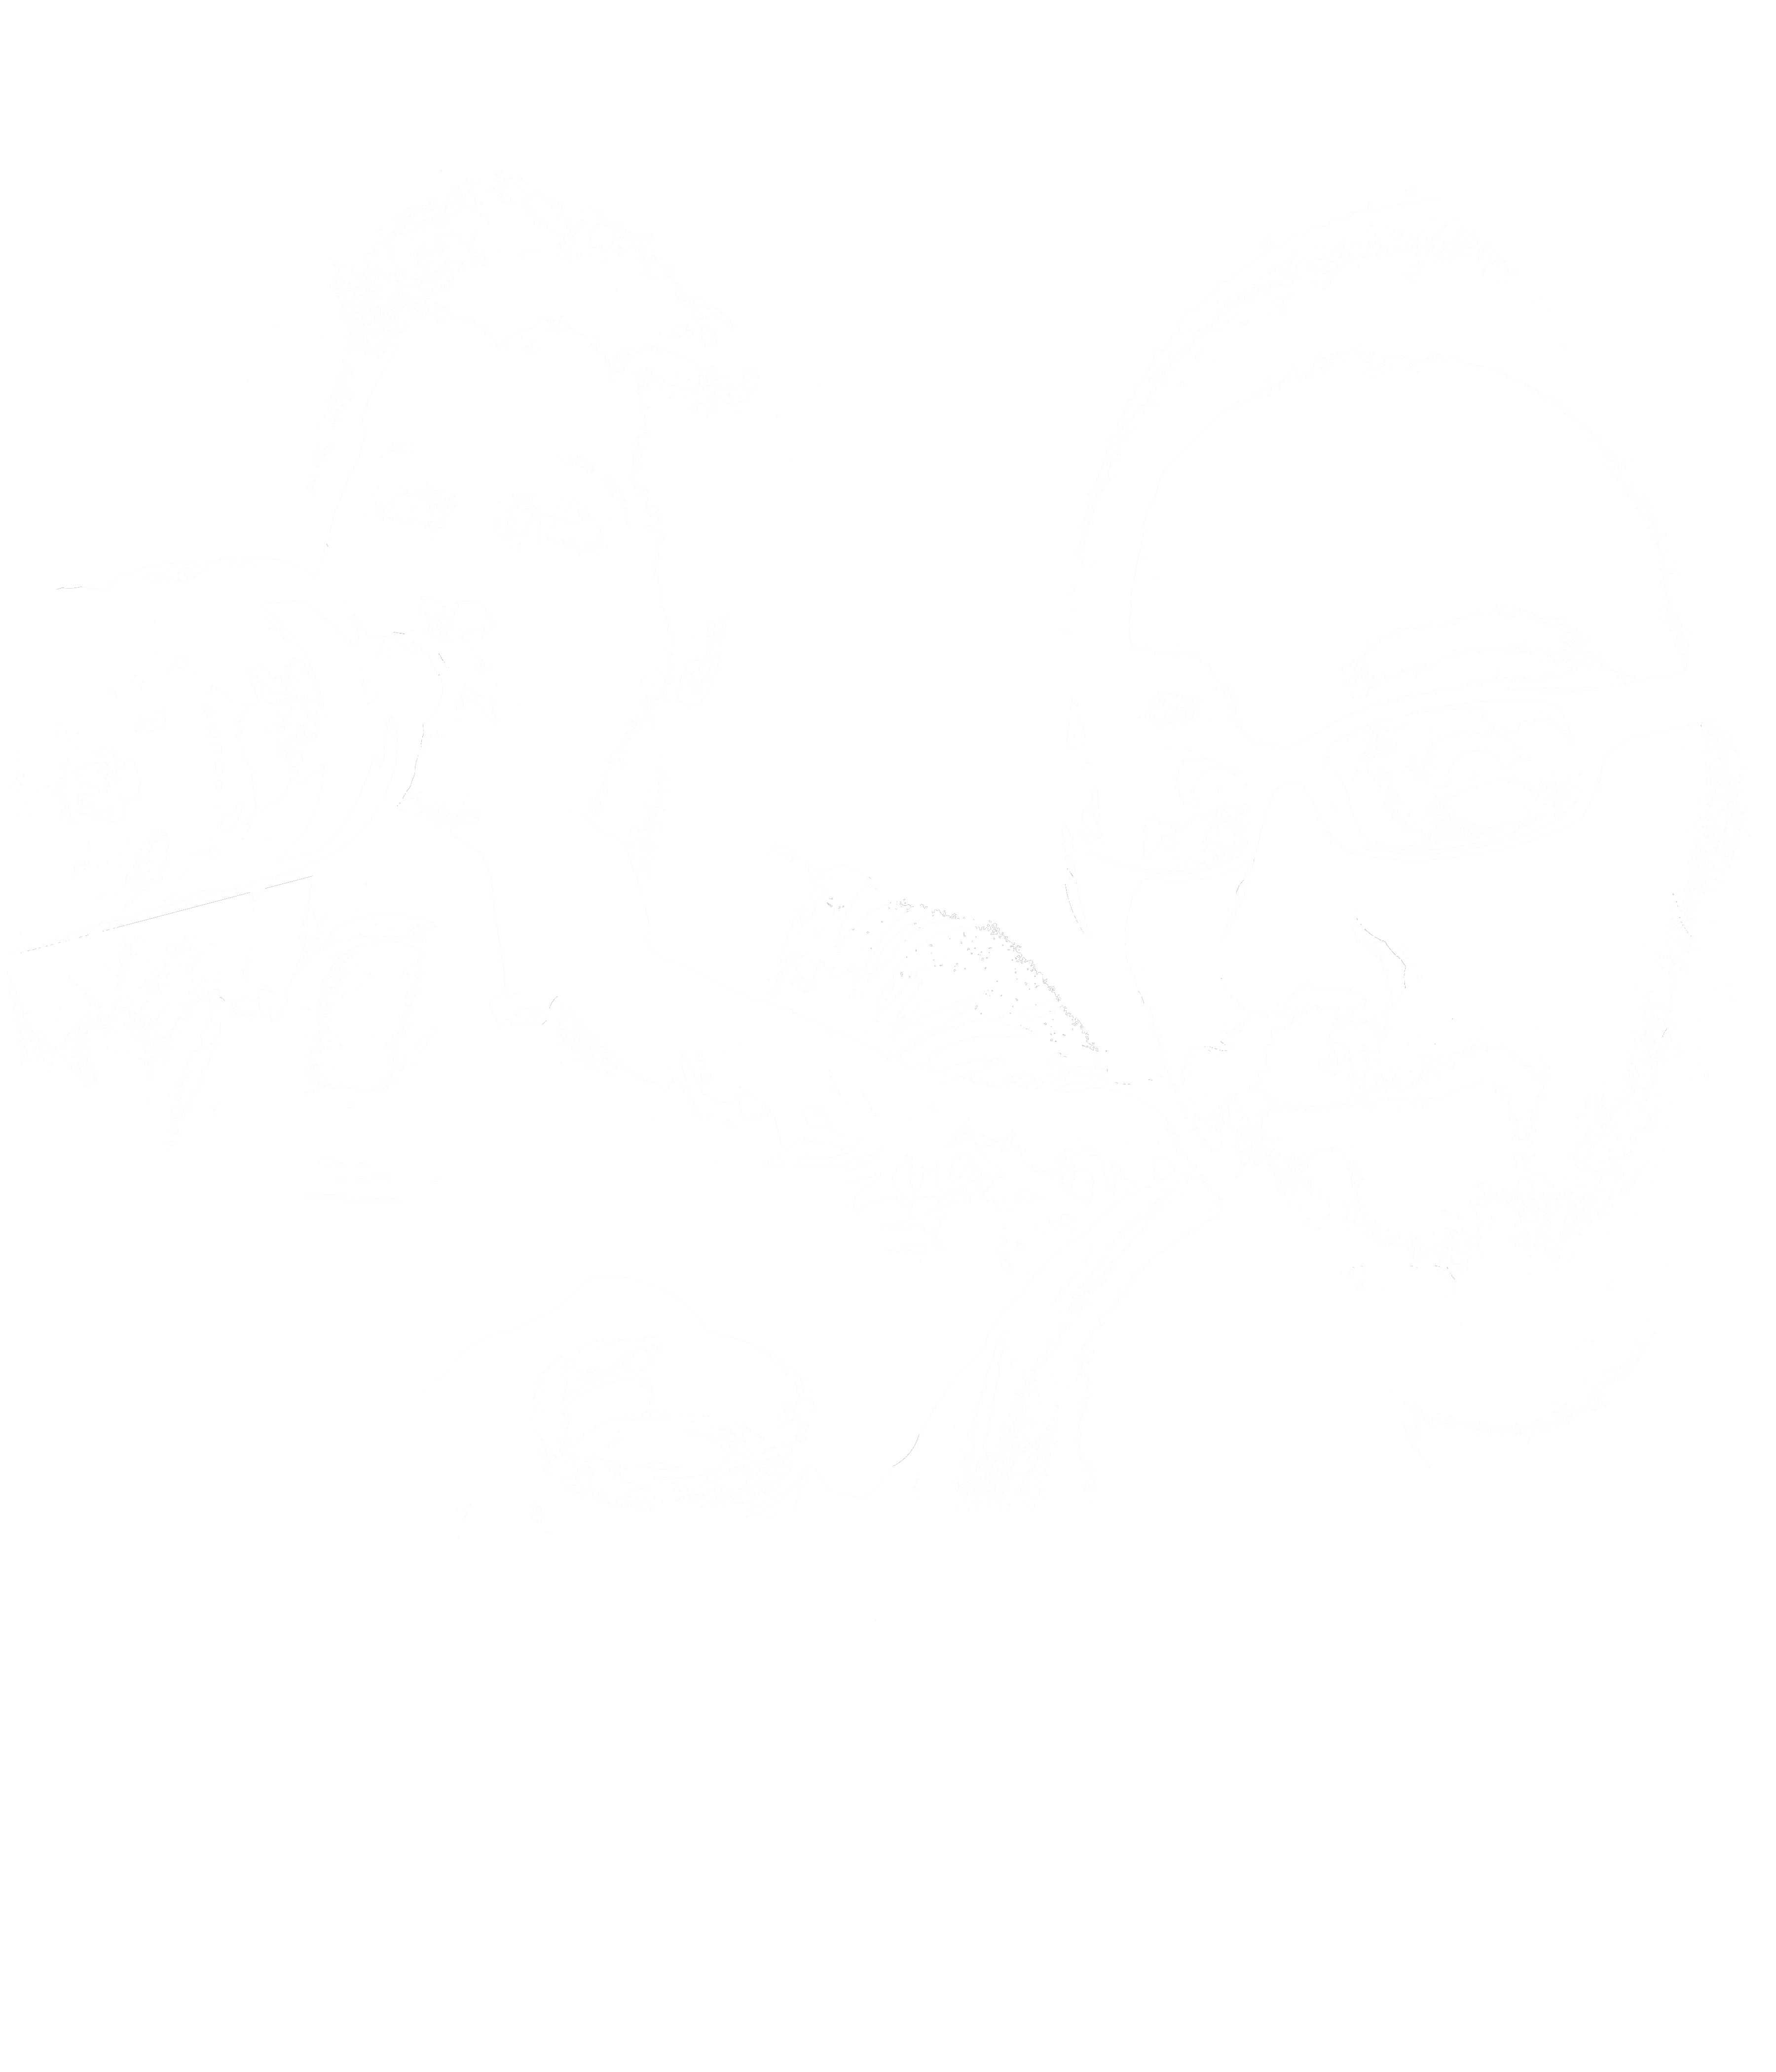 The Shots For Likes Podcast logo